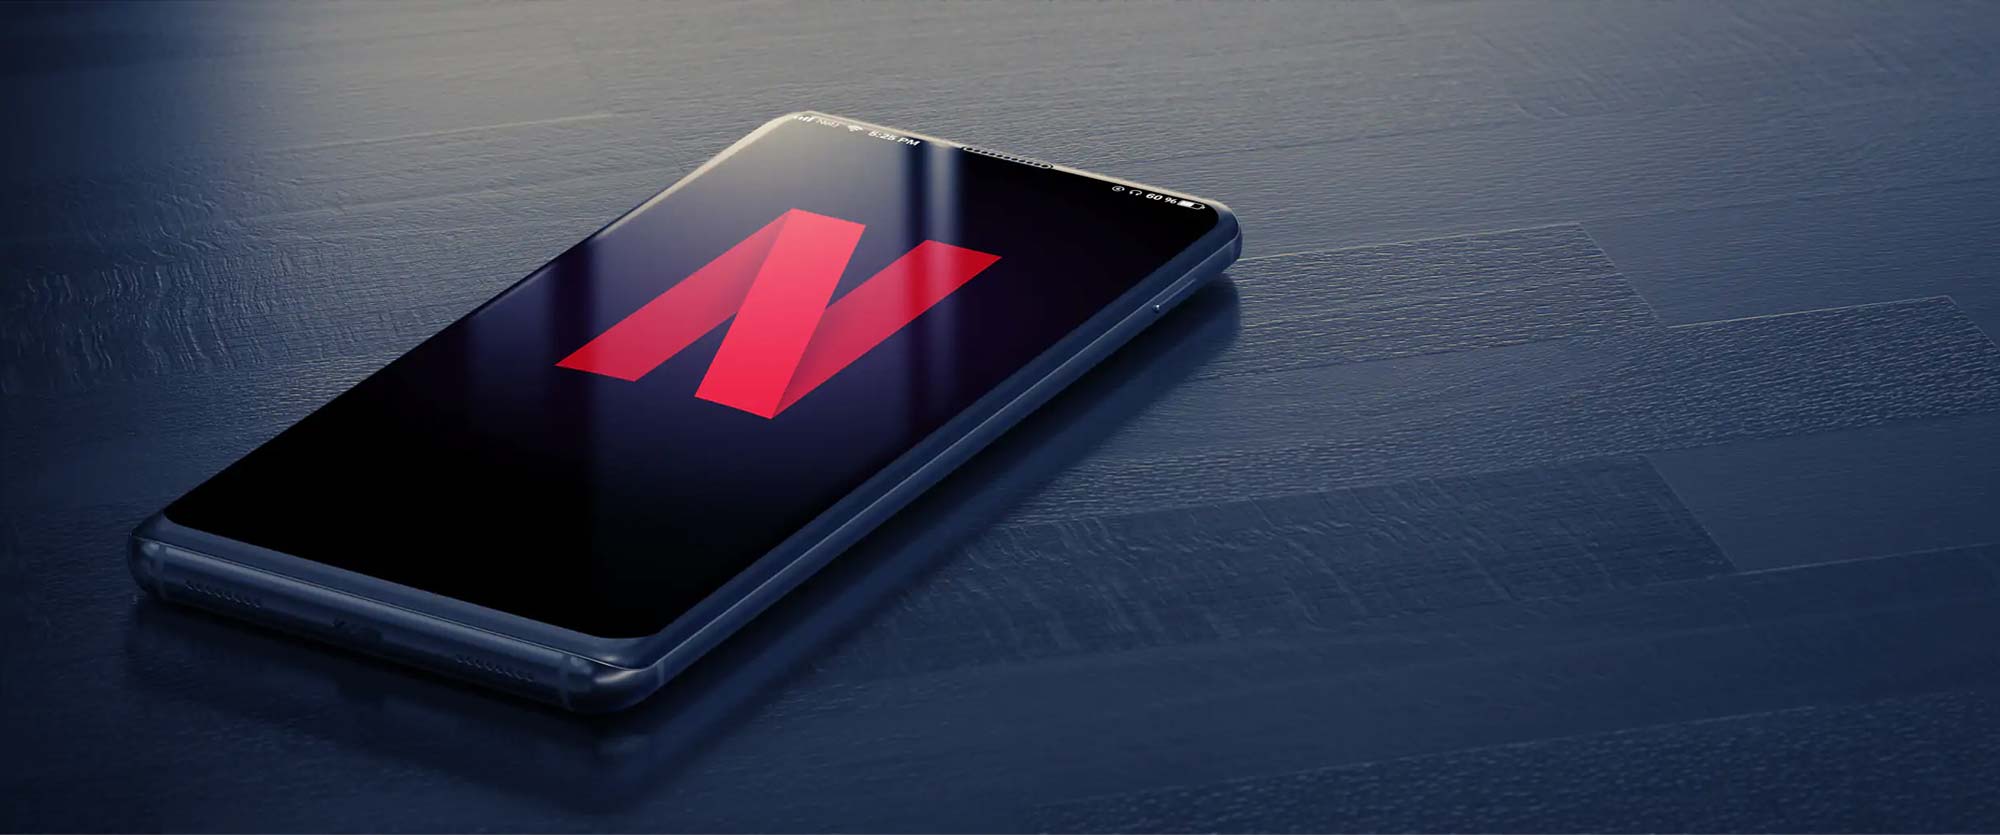 Netflix red logo on iPhone X resting on dark-blue wooden surface